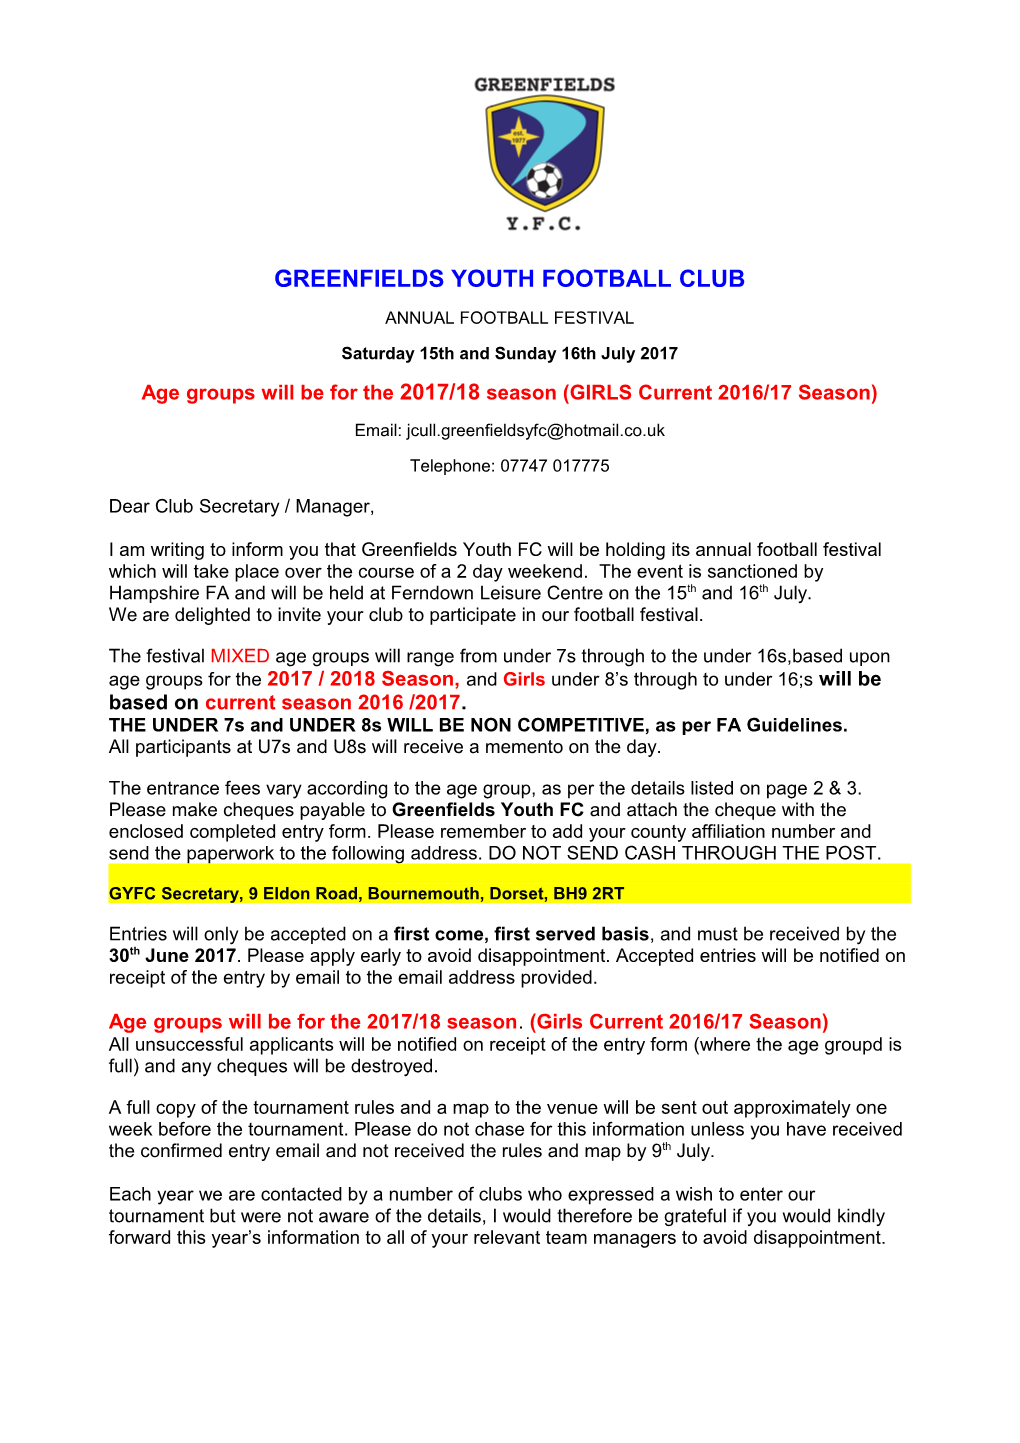 Greenfields Youth Football Club